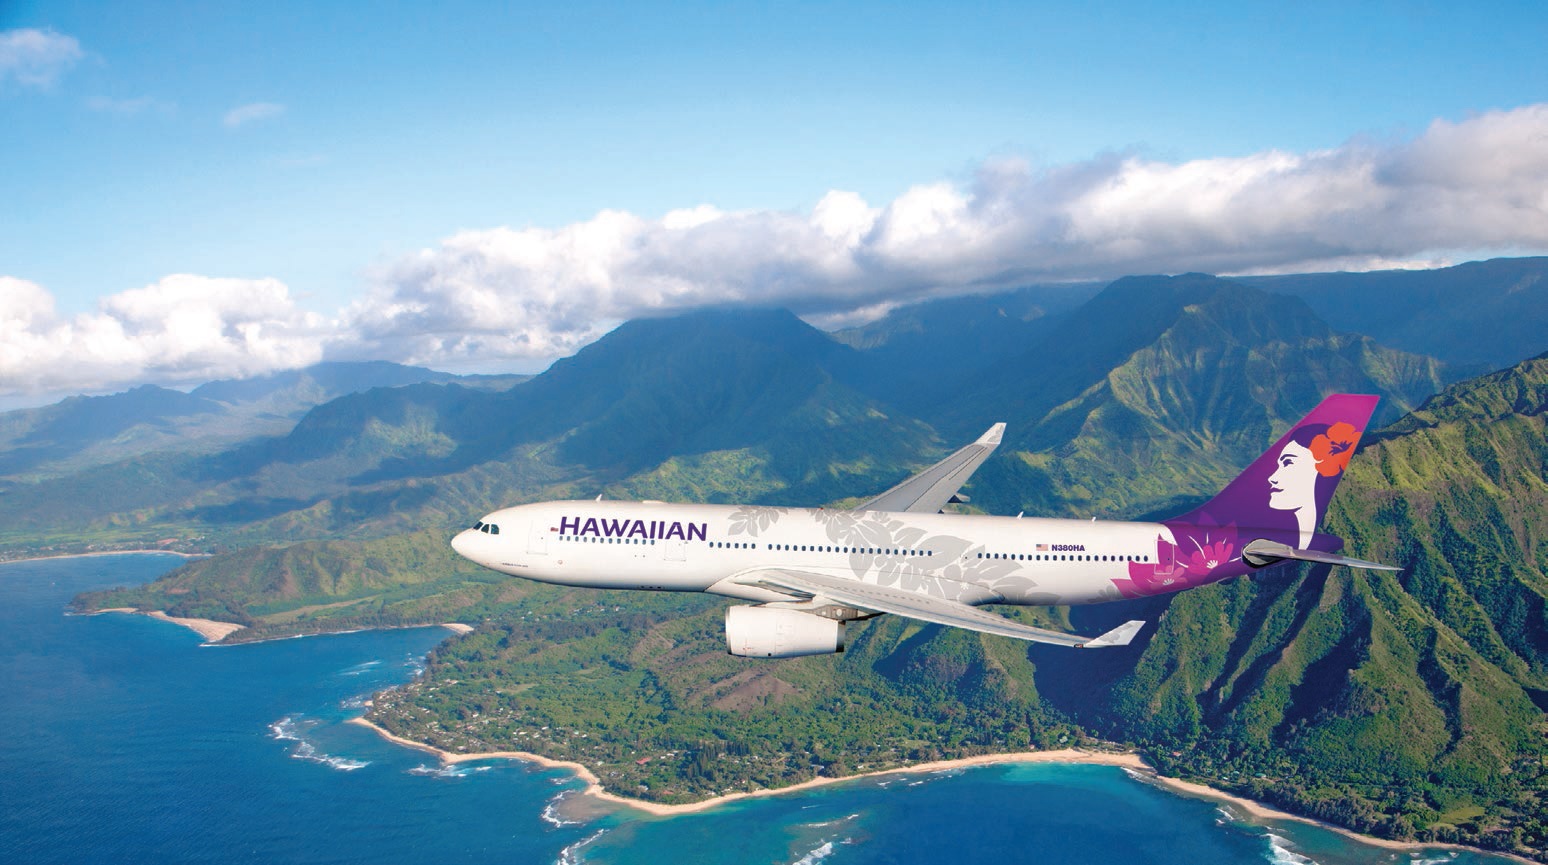 Hawaiian Airlines soars high with its new Travel Pono initiative PLANE PHOTO COURTESY OF HAWAIIAN AIRLINES